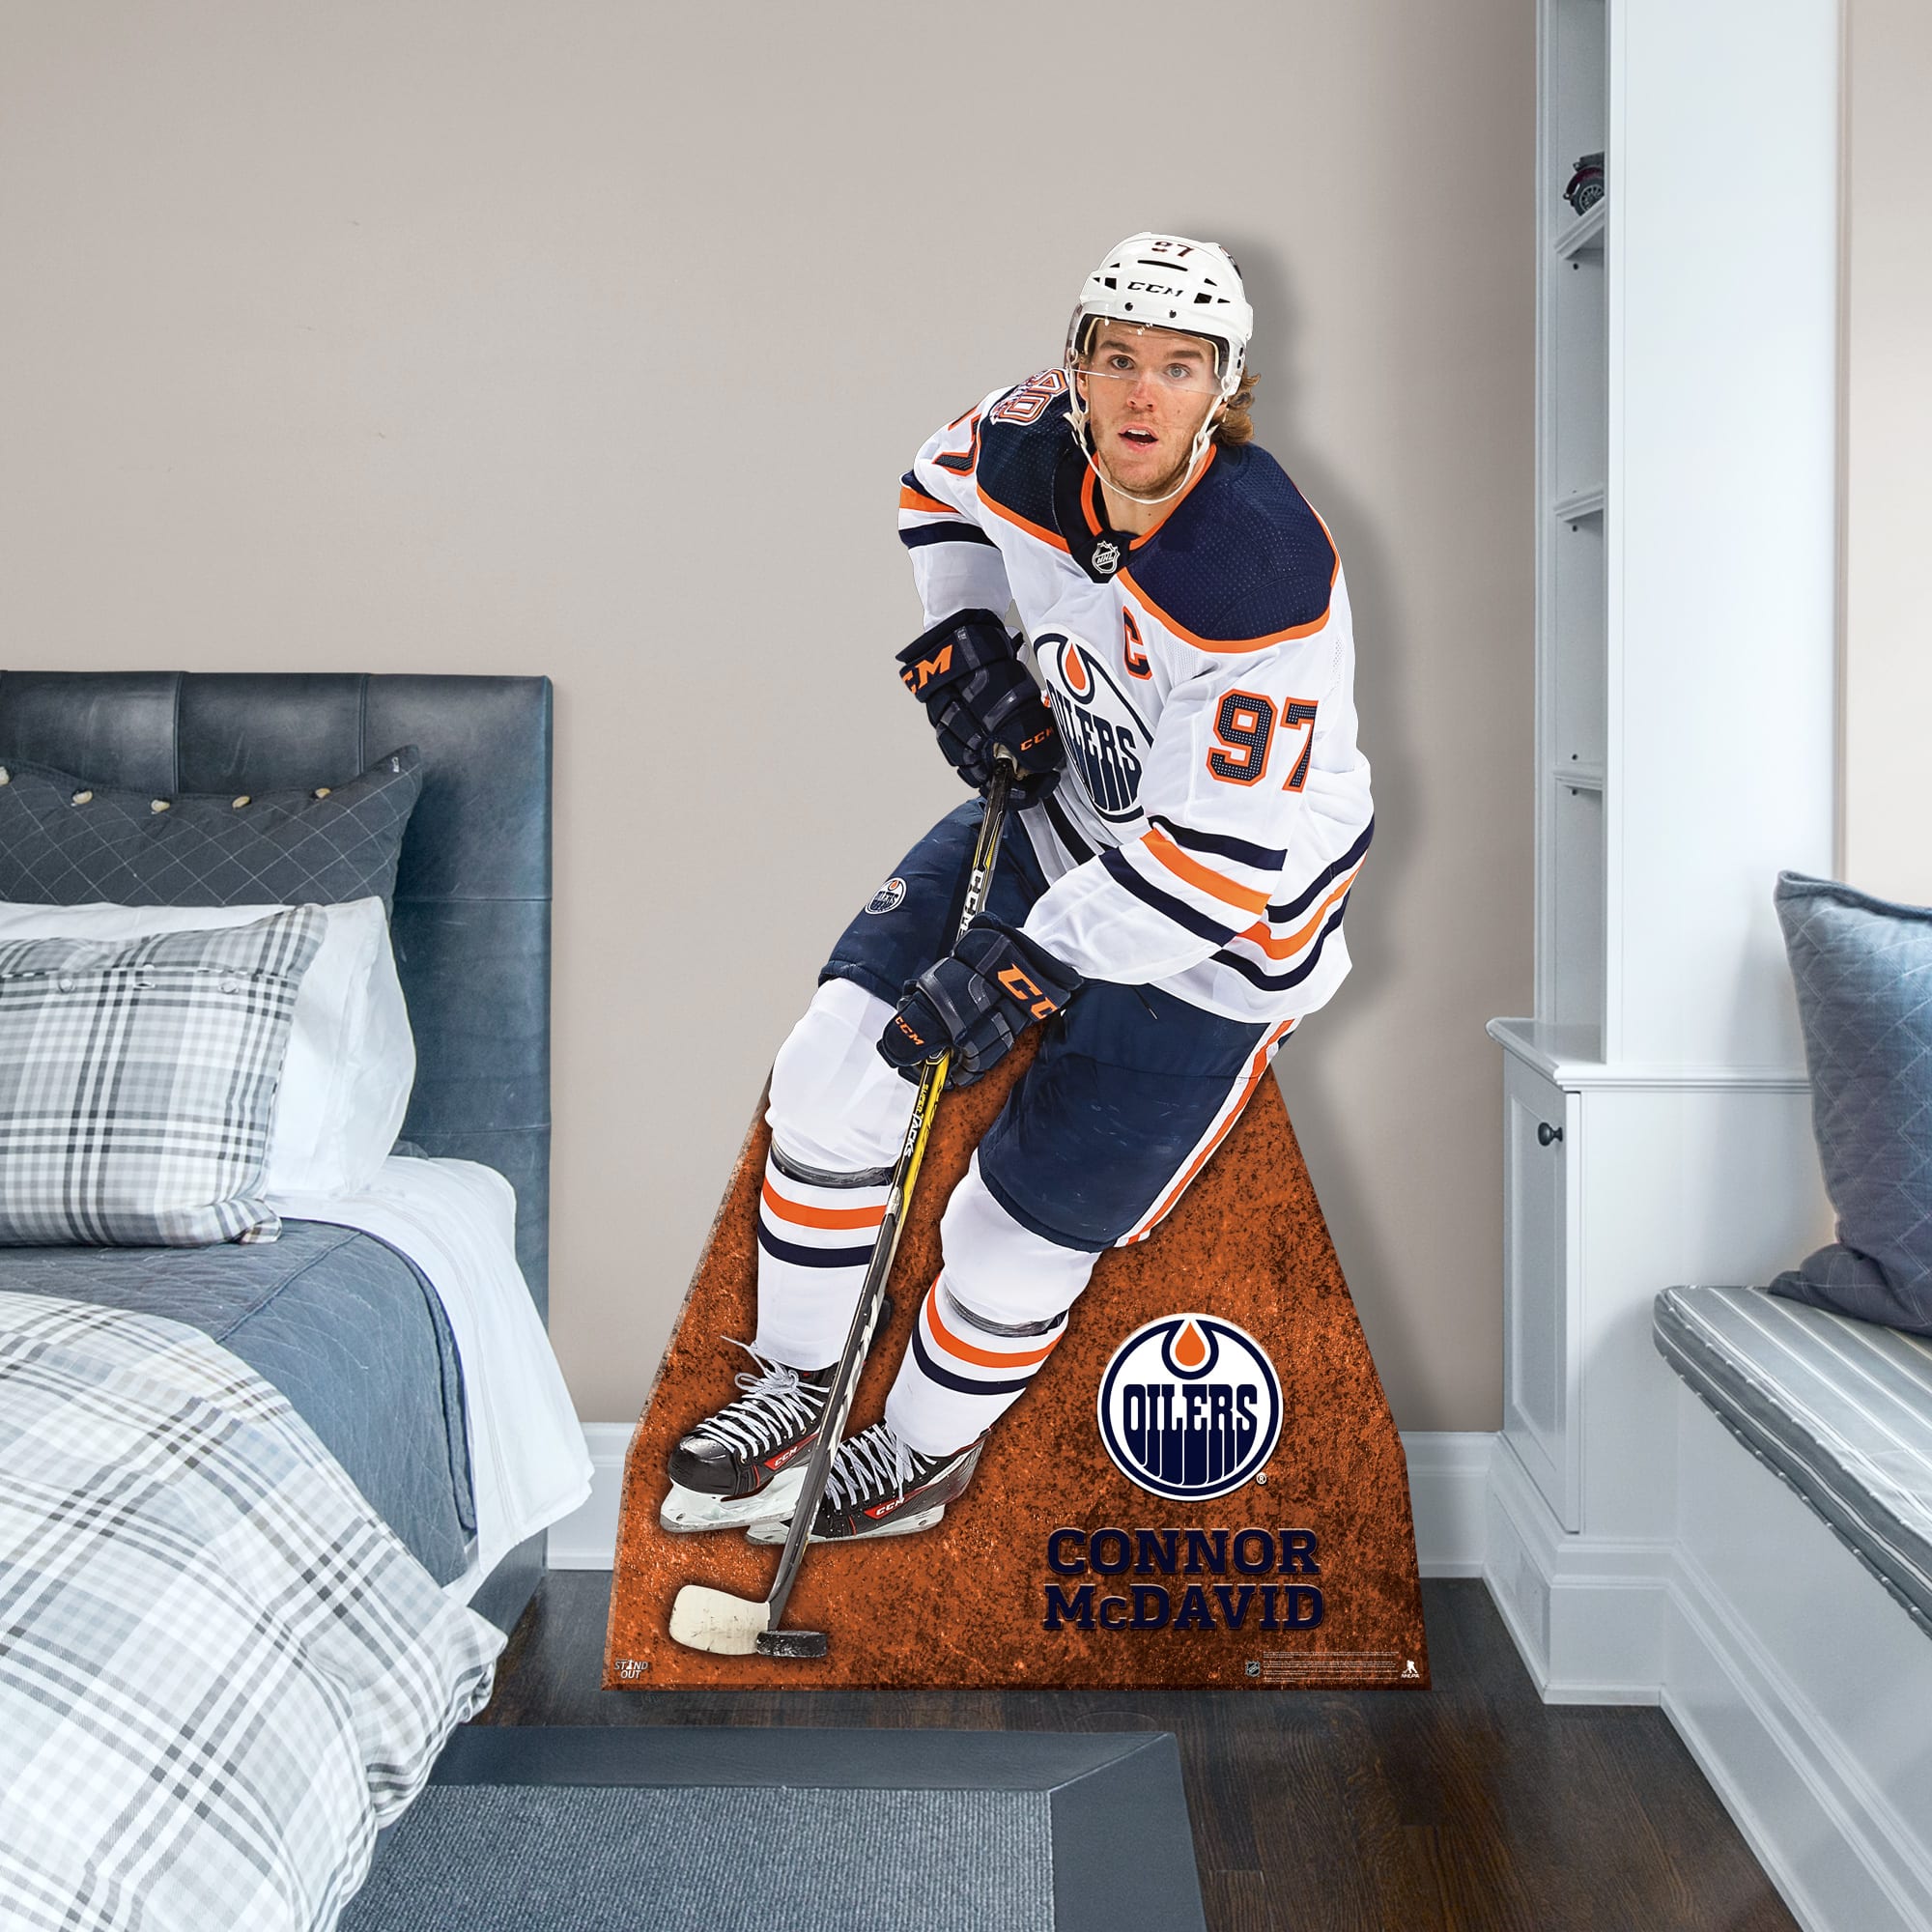 Connor McDavid for Edmonton Oilers: Stand Out - Officially Licensed NHL Removable Wall Decal 44.0"W x 77.0"H by Fathead | Vinyl